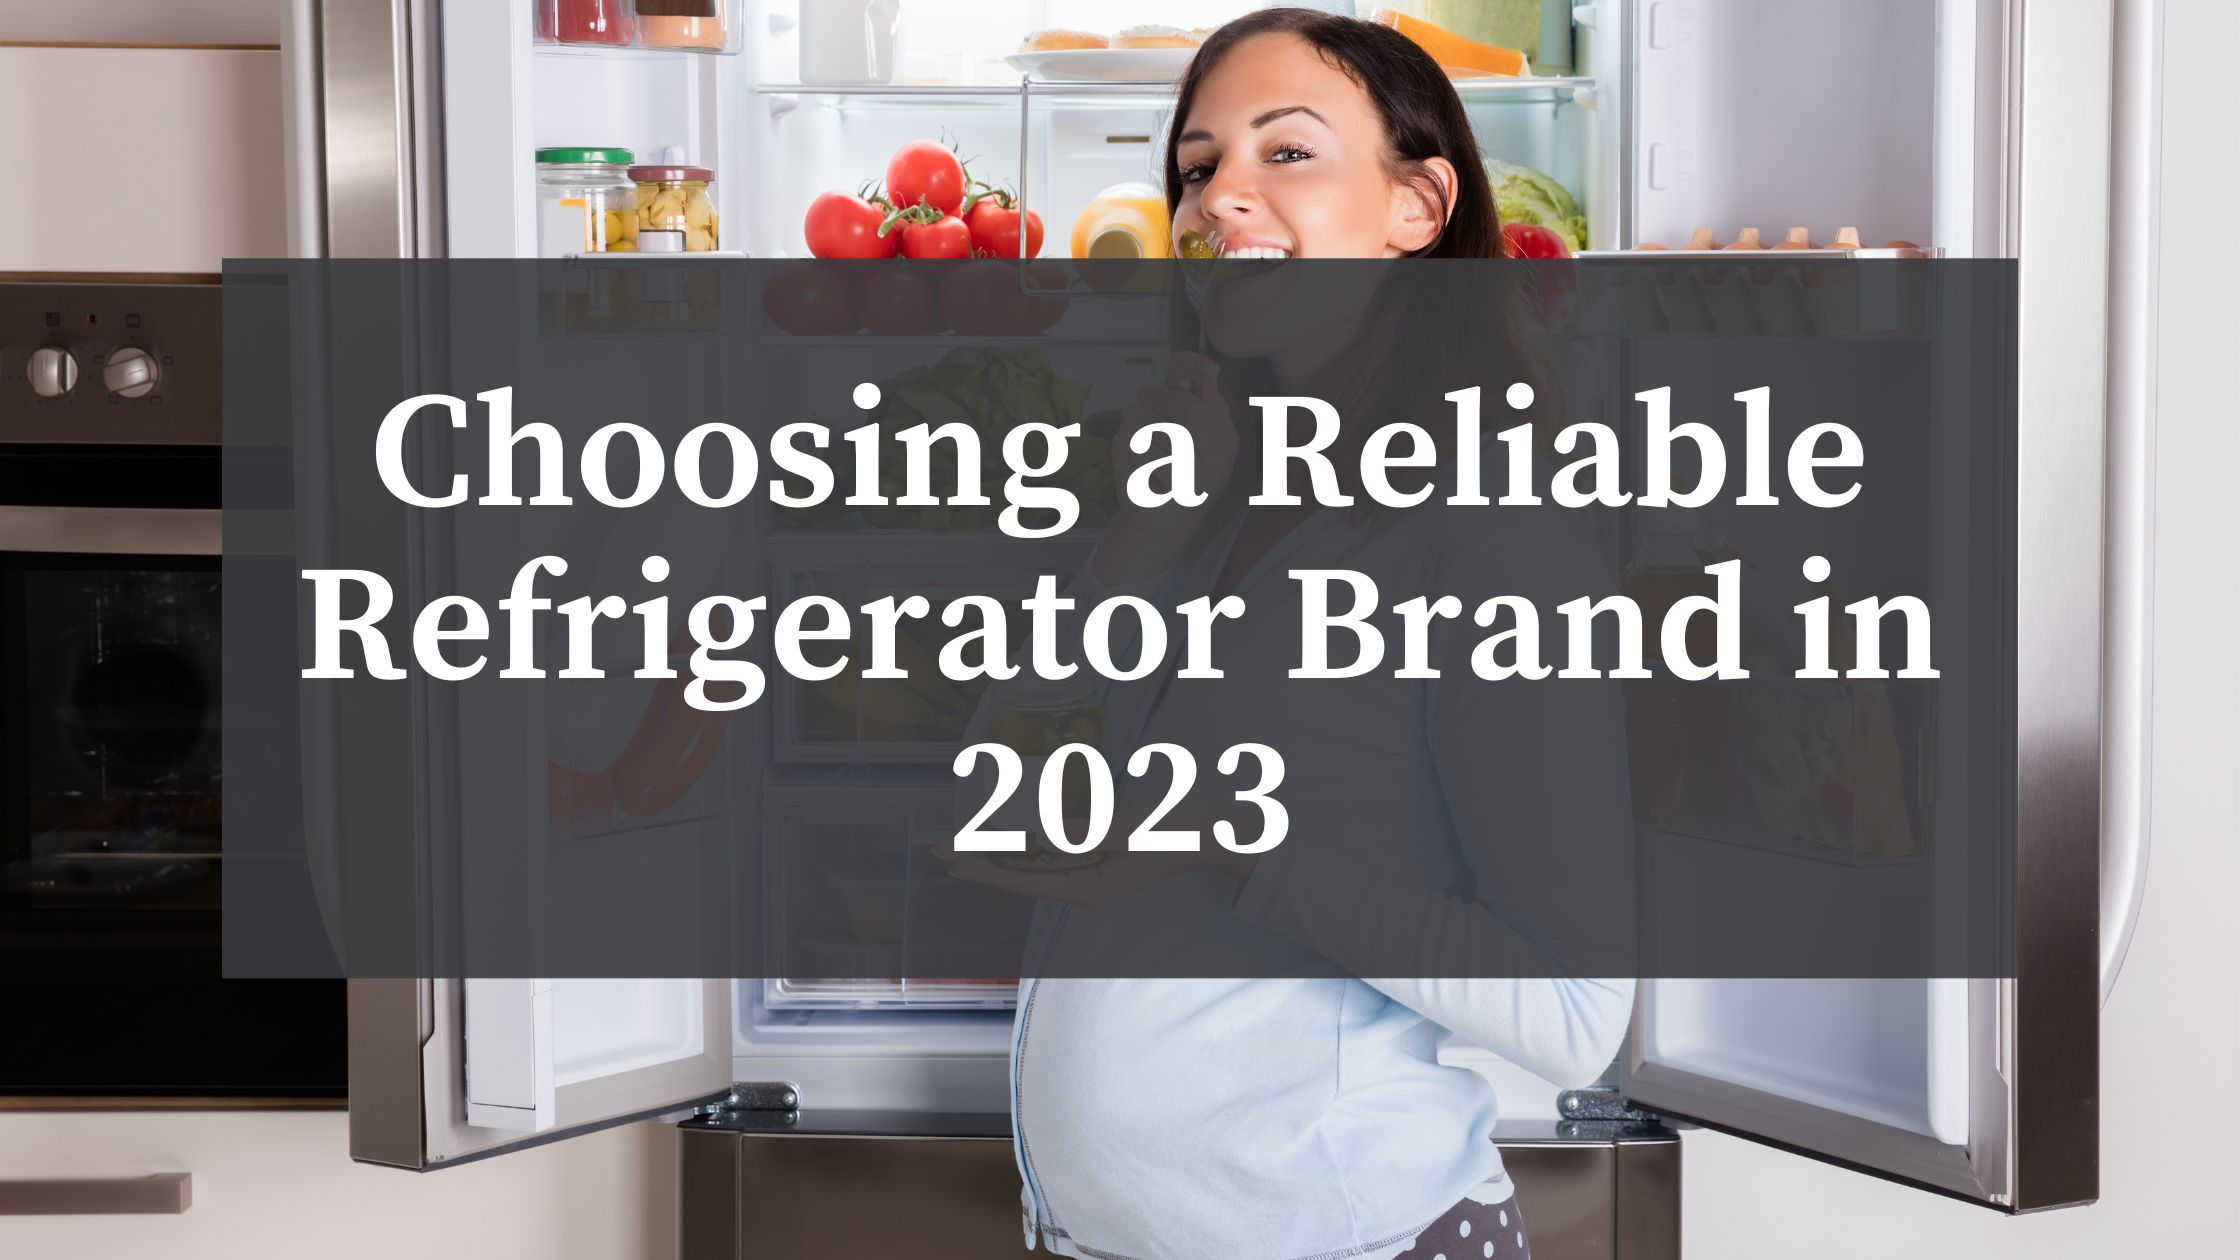 which refrigerator brand is most reliable